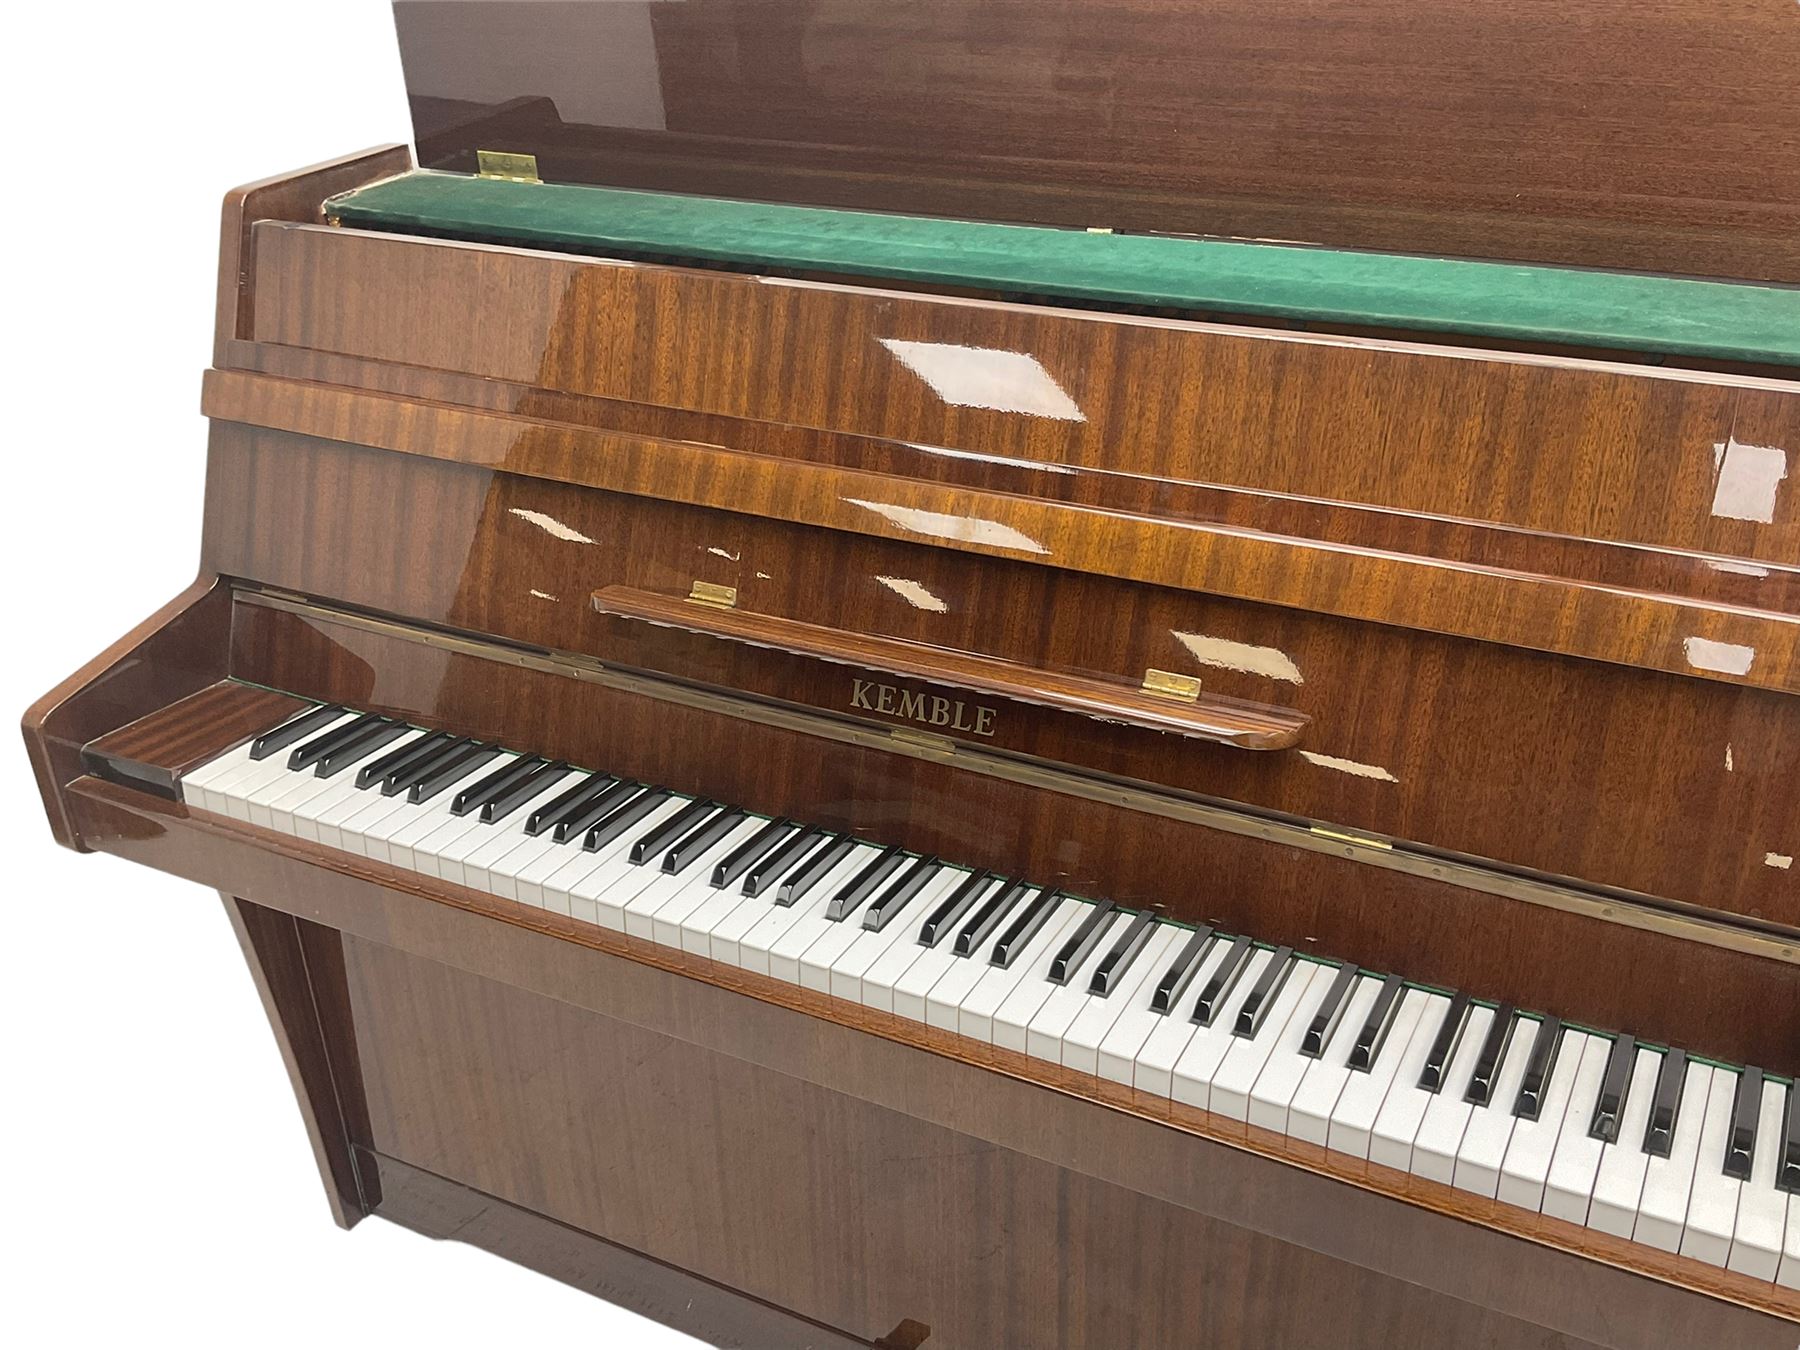 Kemble - upright piano in lacquered mahogany case - Image 5 of 9